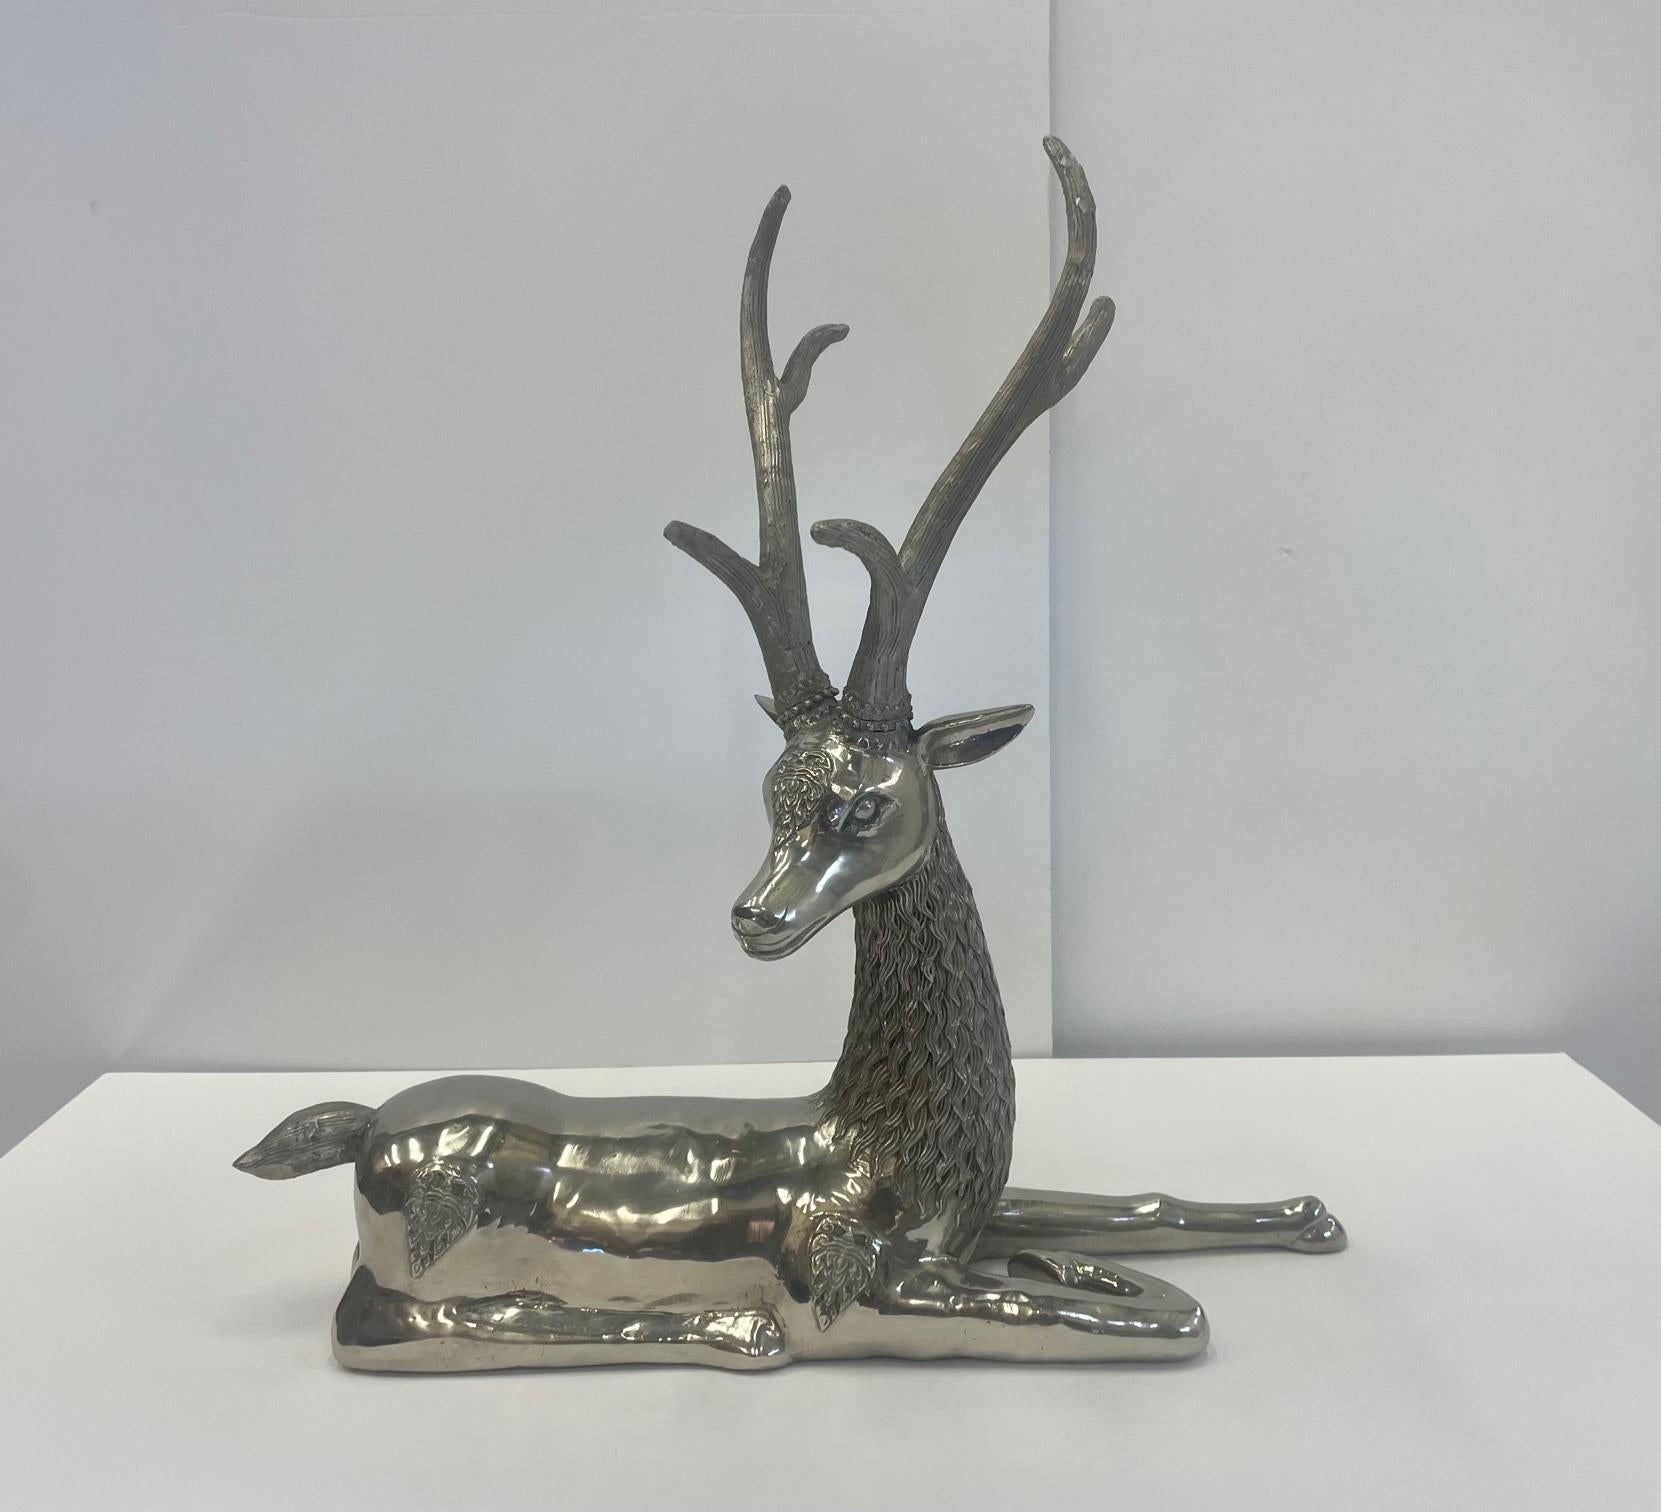 Large impressive cast brass nickel plated table top sculpture of a reclining deer with antlers.